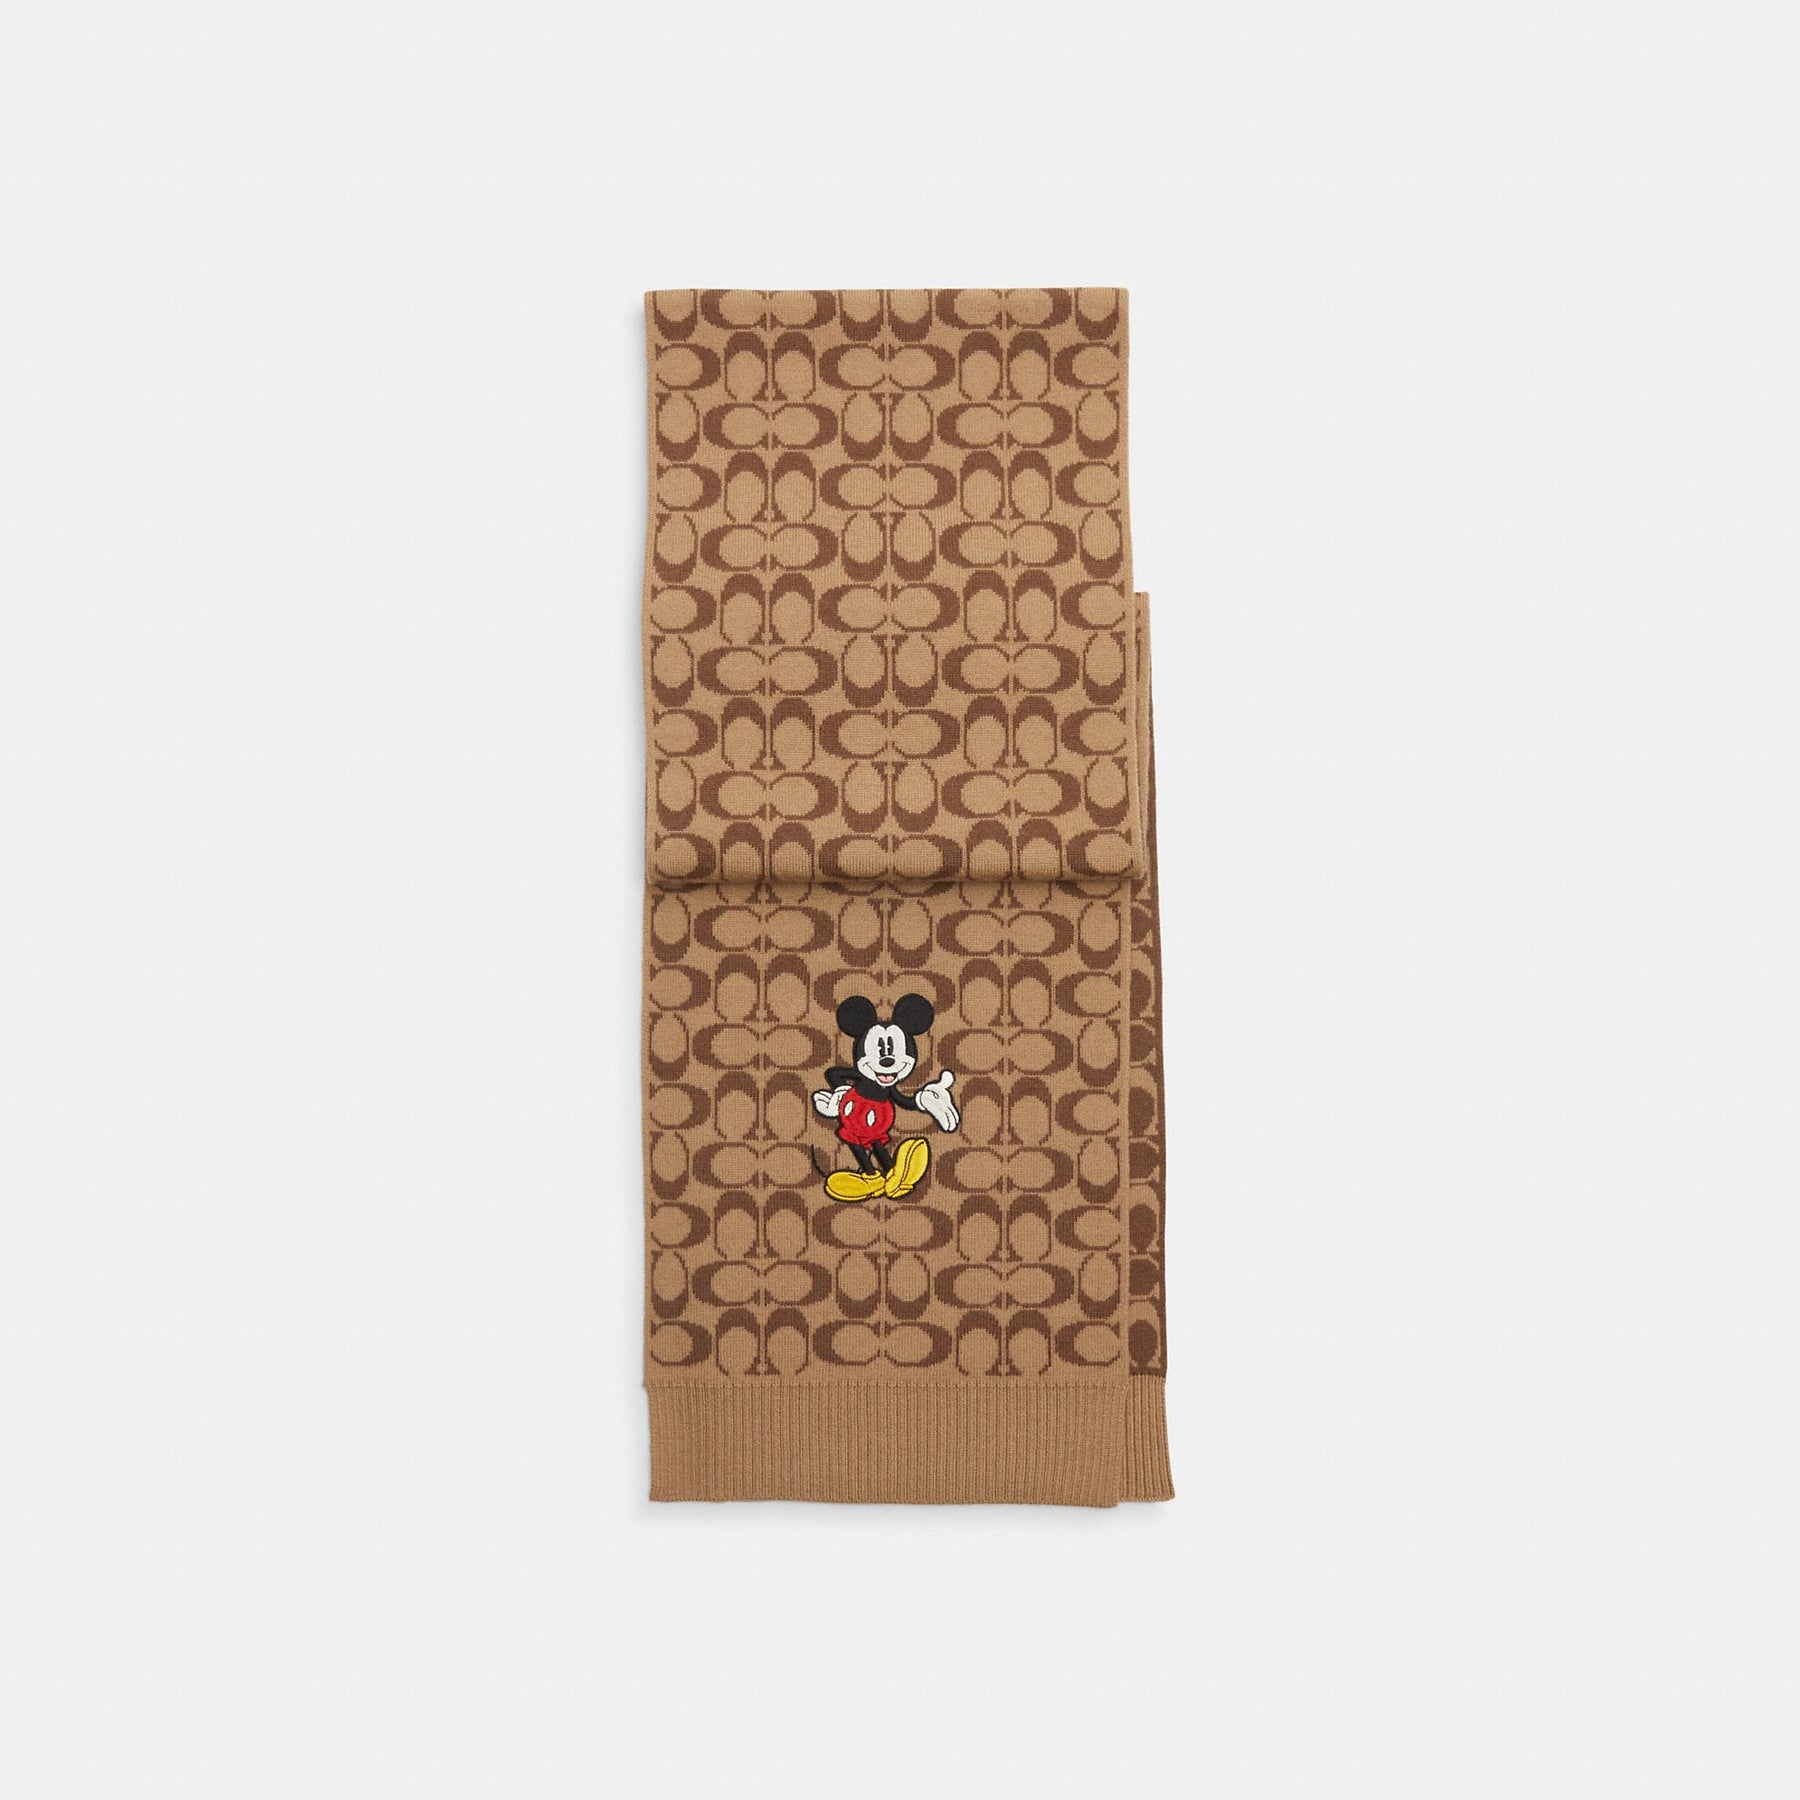 100% Authentic GUCCI x Disney Micky Mouse Jacquard Sweater Size